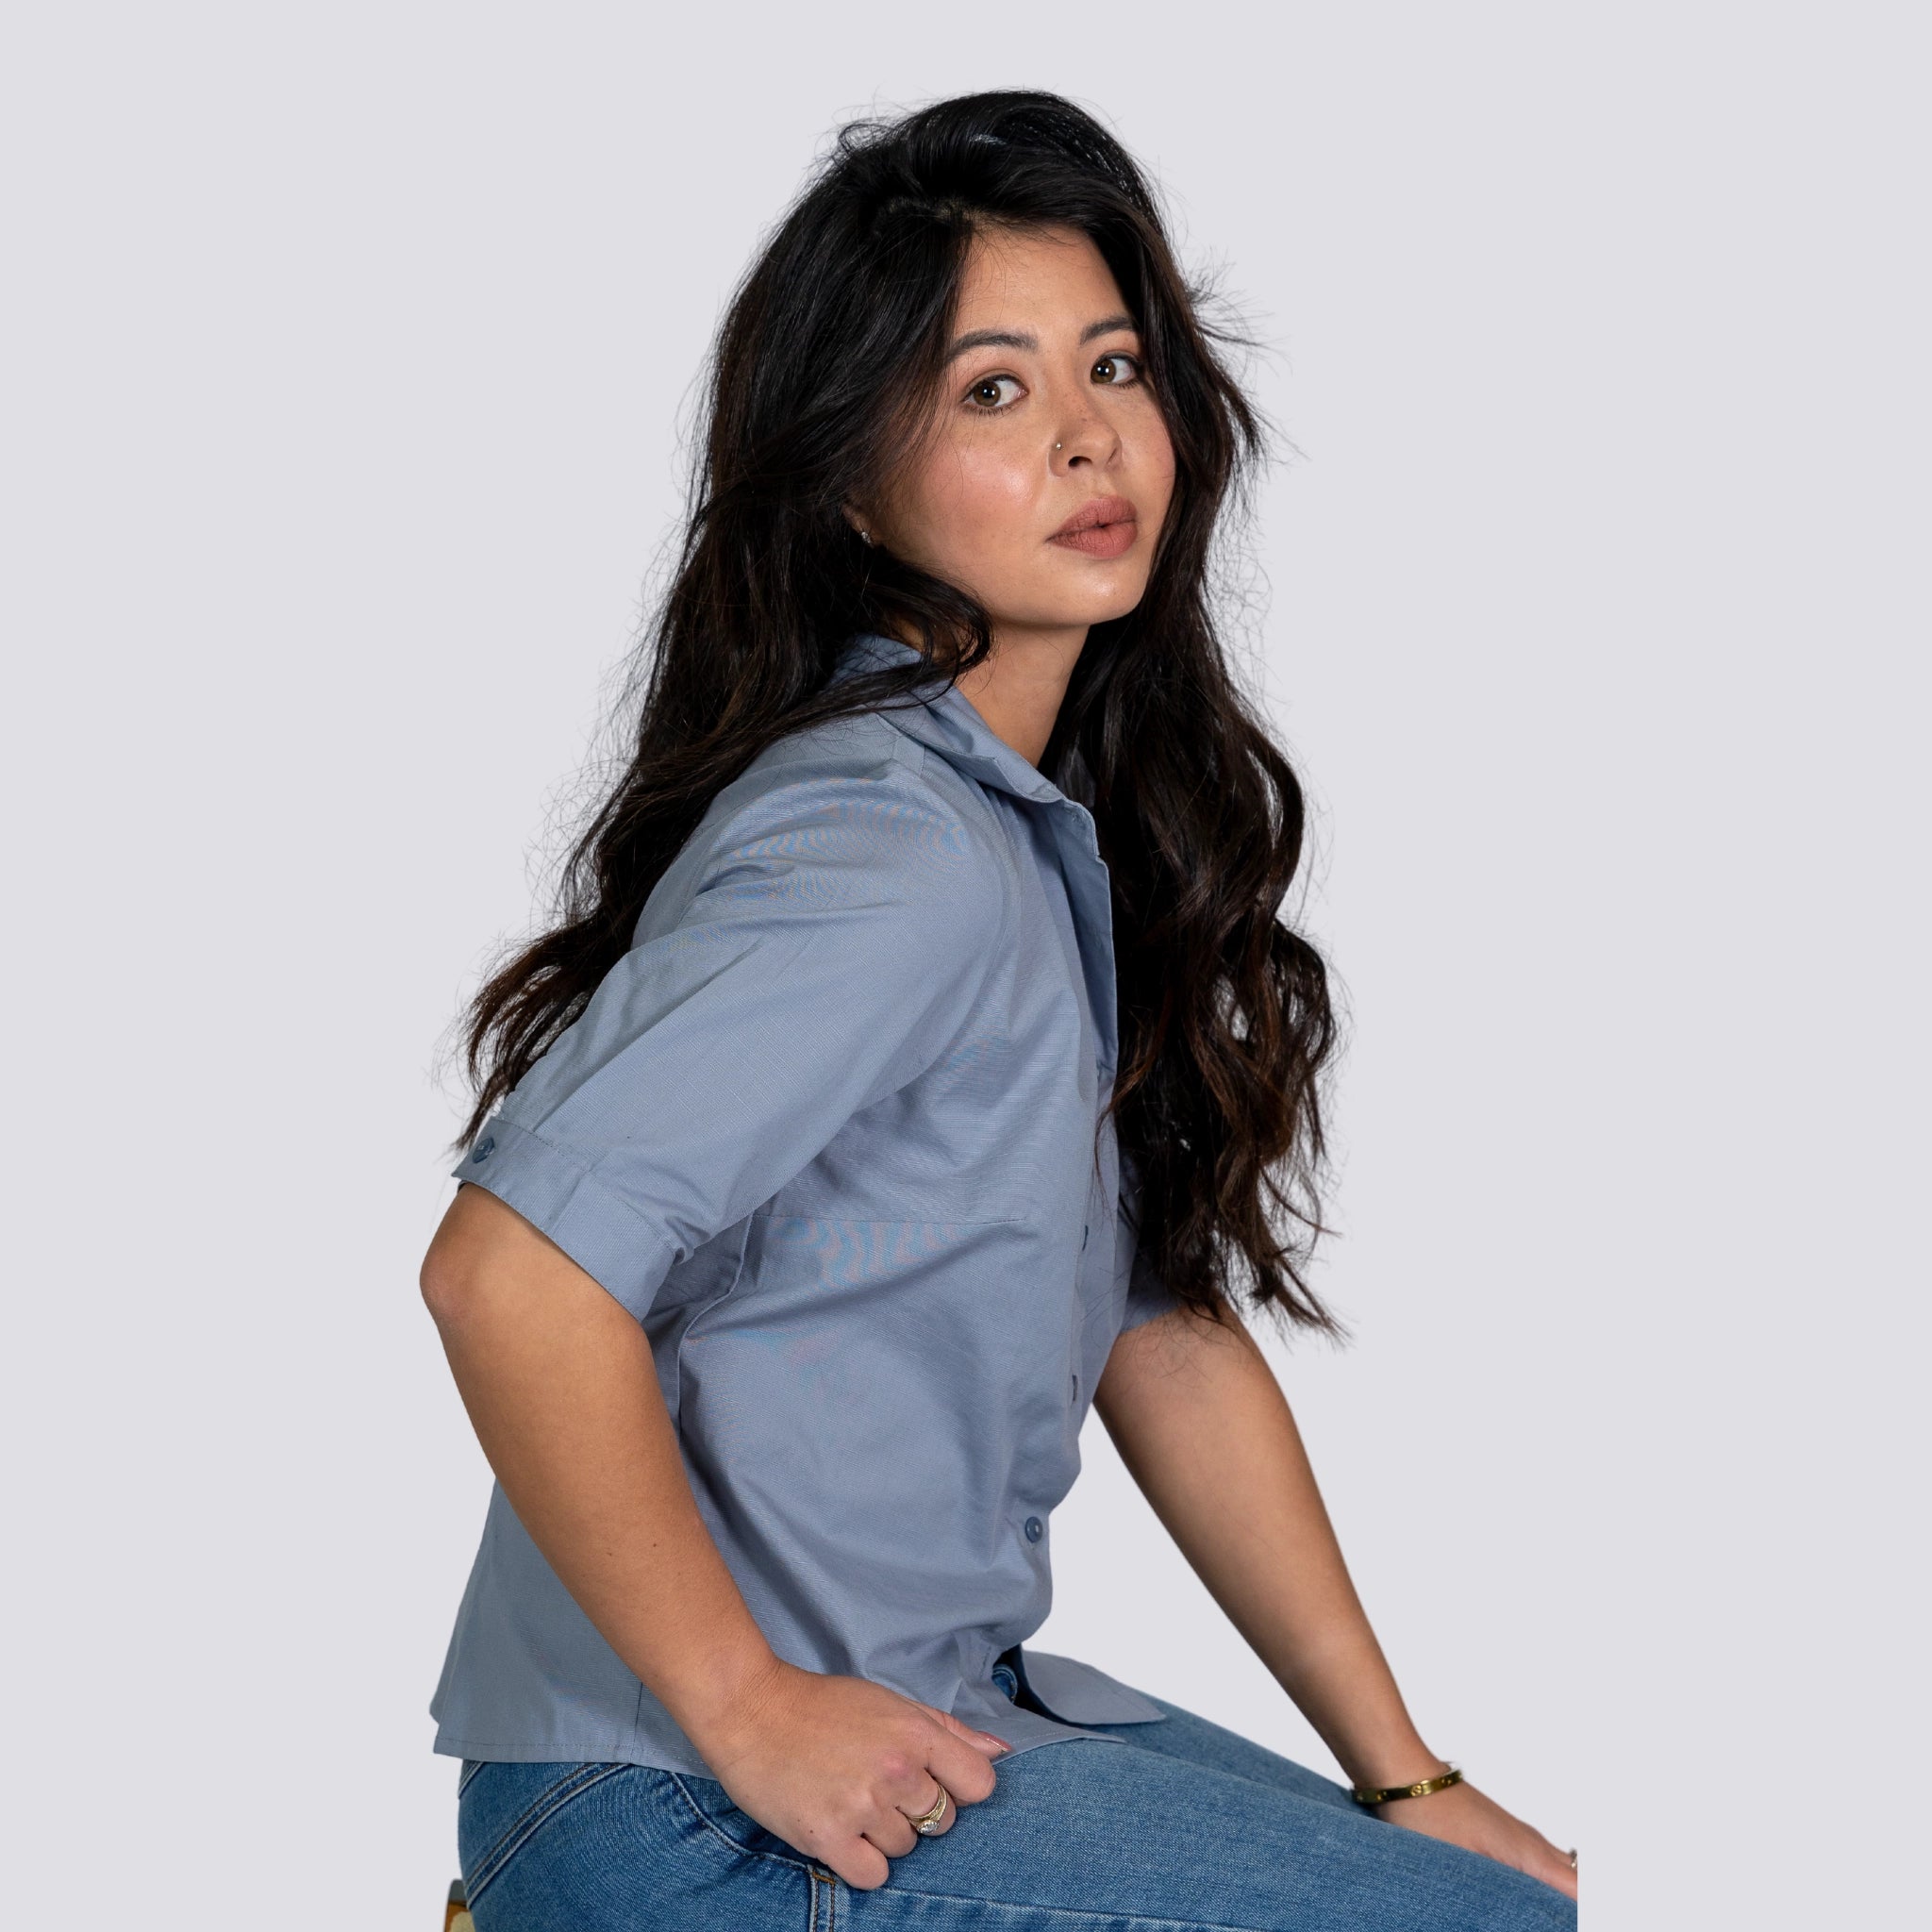 Woman in a Karee Grey Mist Linen Shirt posing sideways with a subtle glance towards the camera, set against a plain white background.